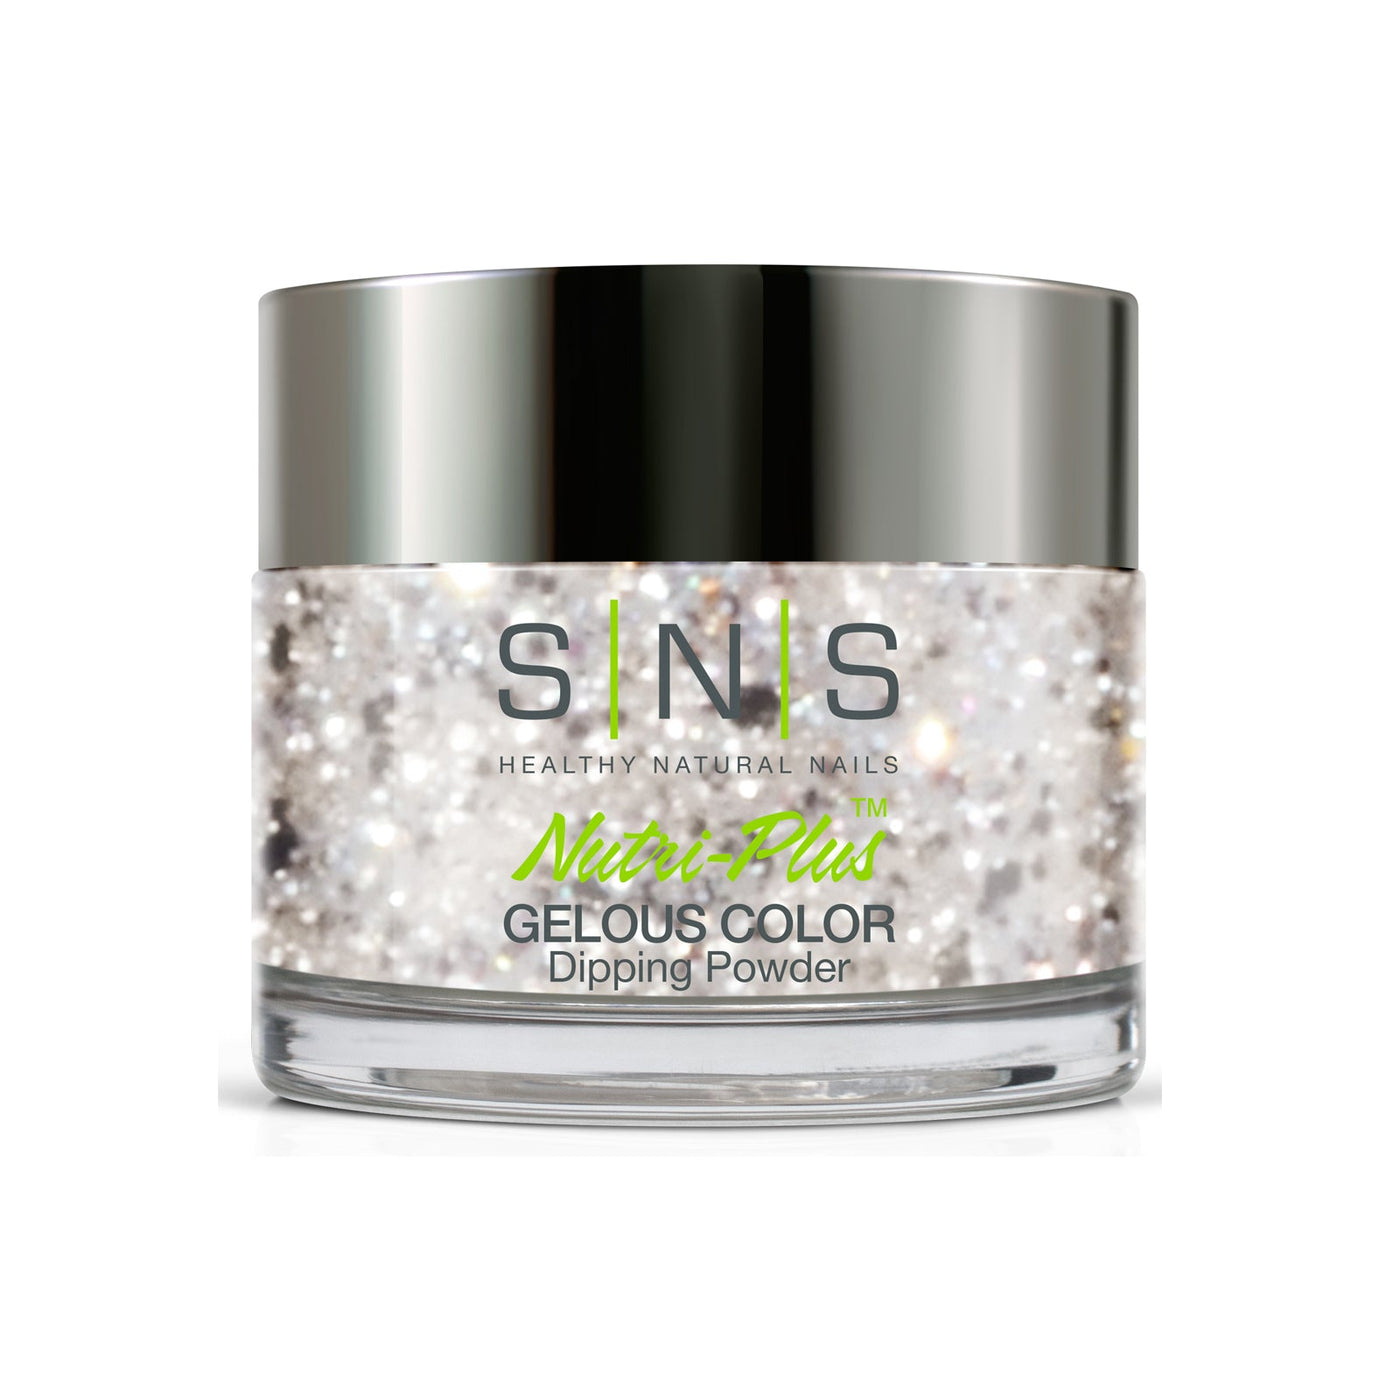 SNS Gelous Color Dipping Powder WW22 Snow Birds (43g) packaging